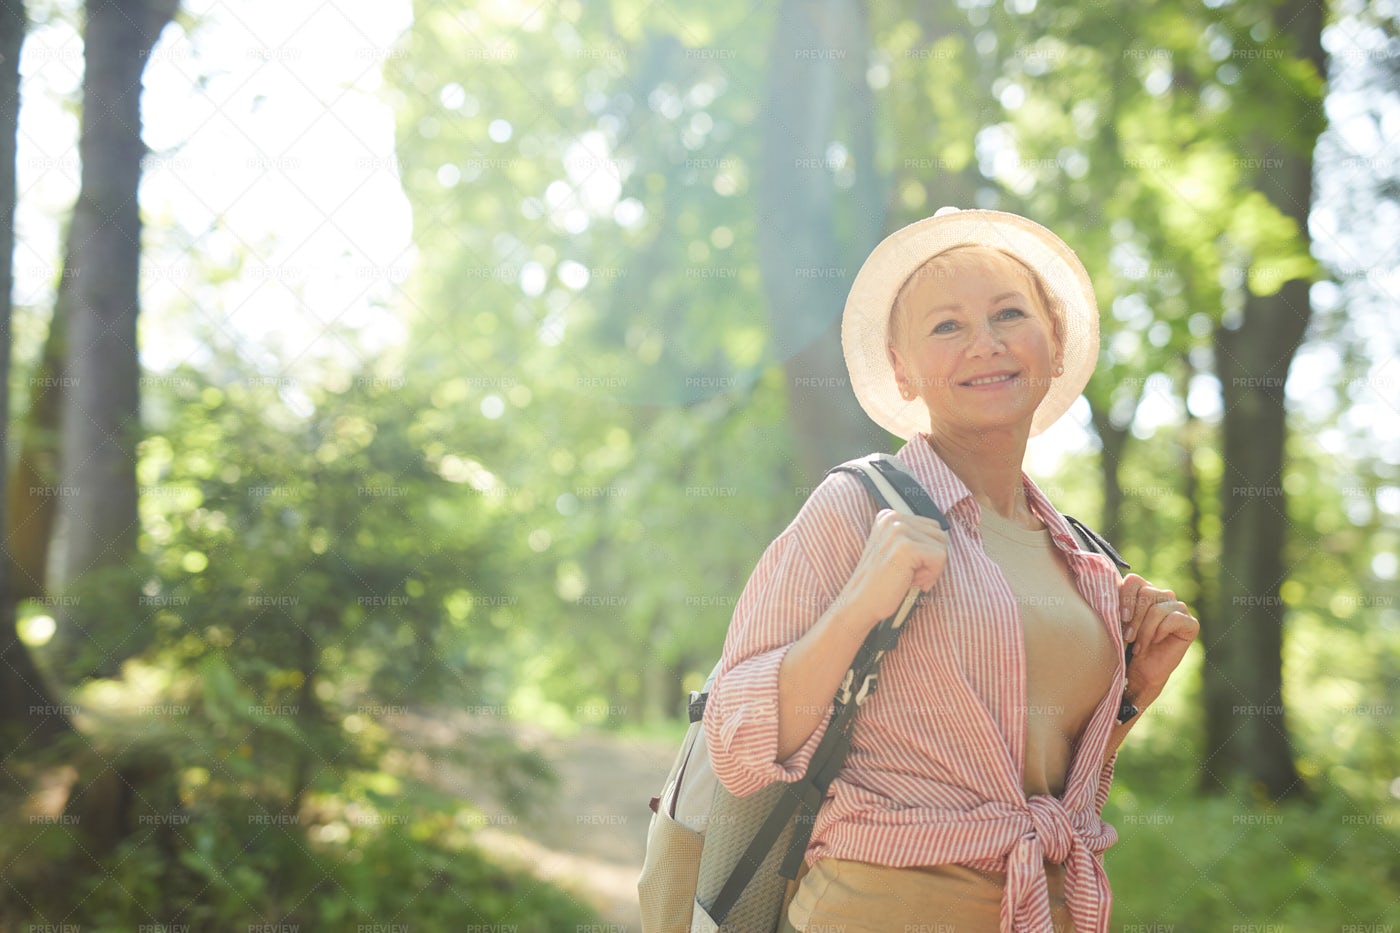 Older Woman In The Forest: Stock Photos